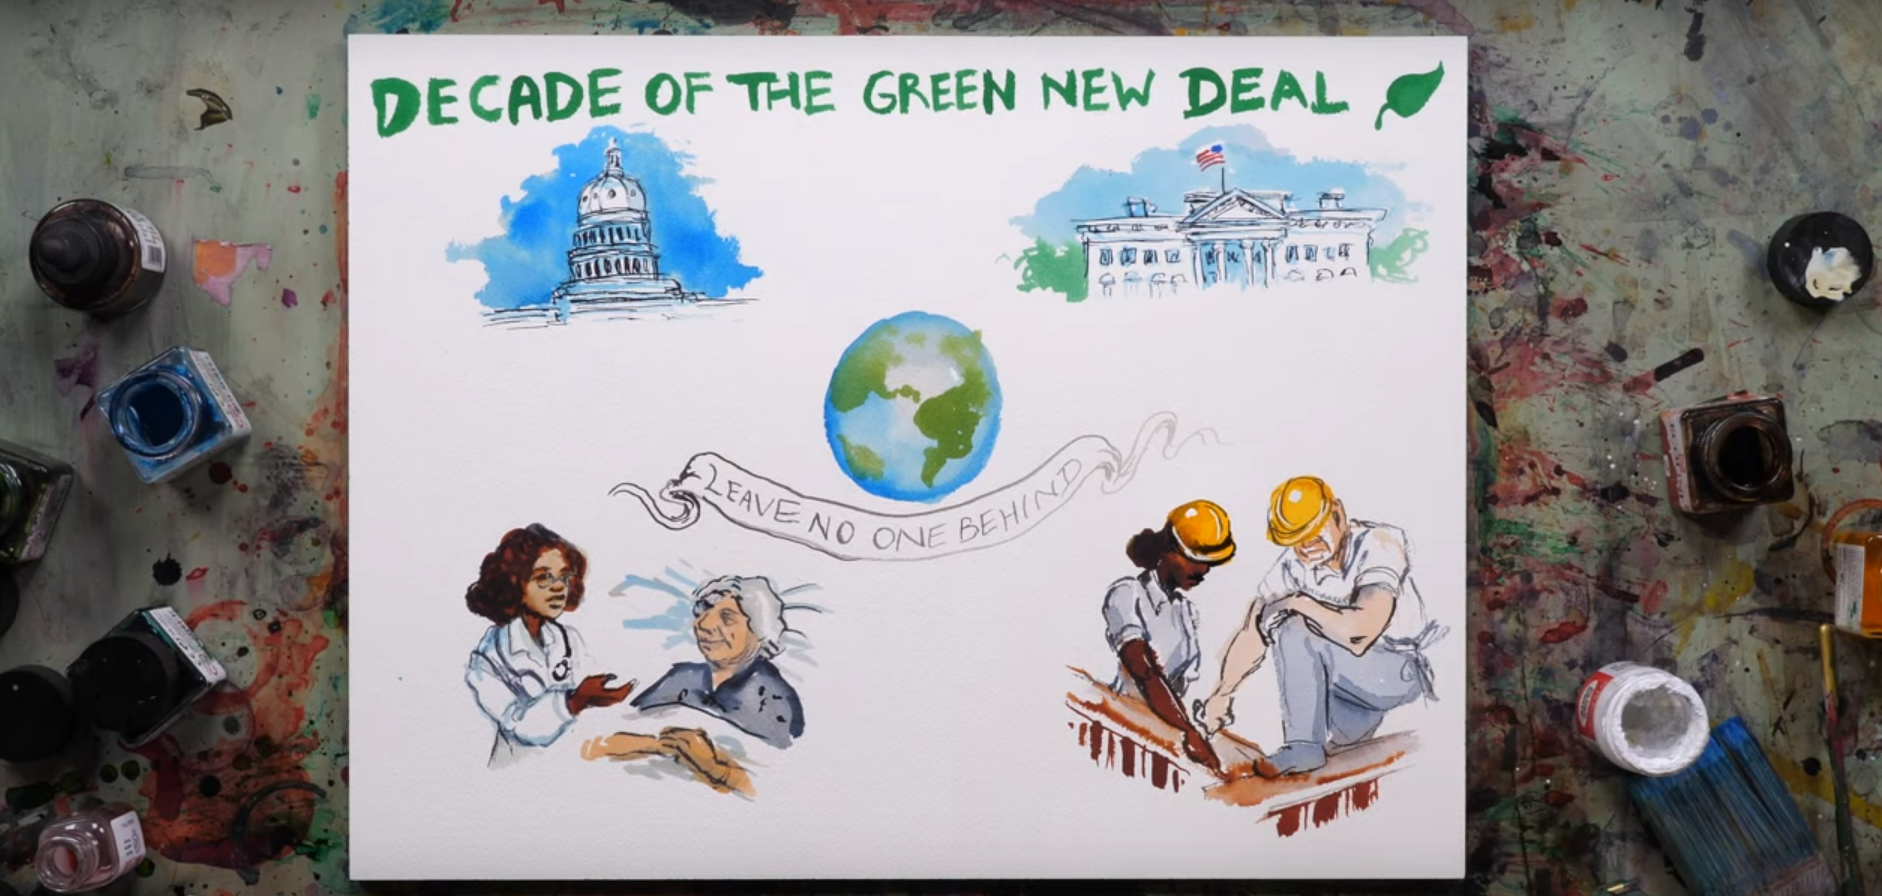 Ocasio-Cortez Promotes Green New Deal With Video That Envisions A Democratic Socialist Utopia | The Daily Caller